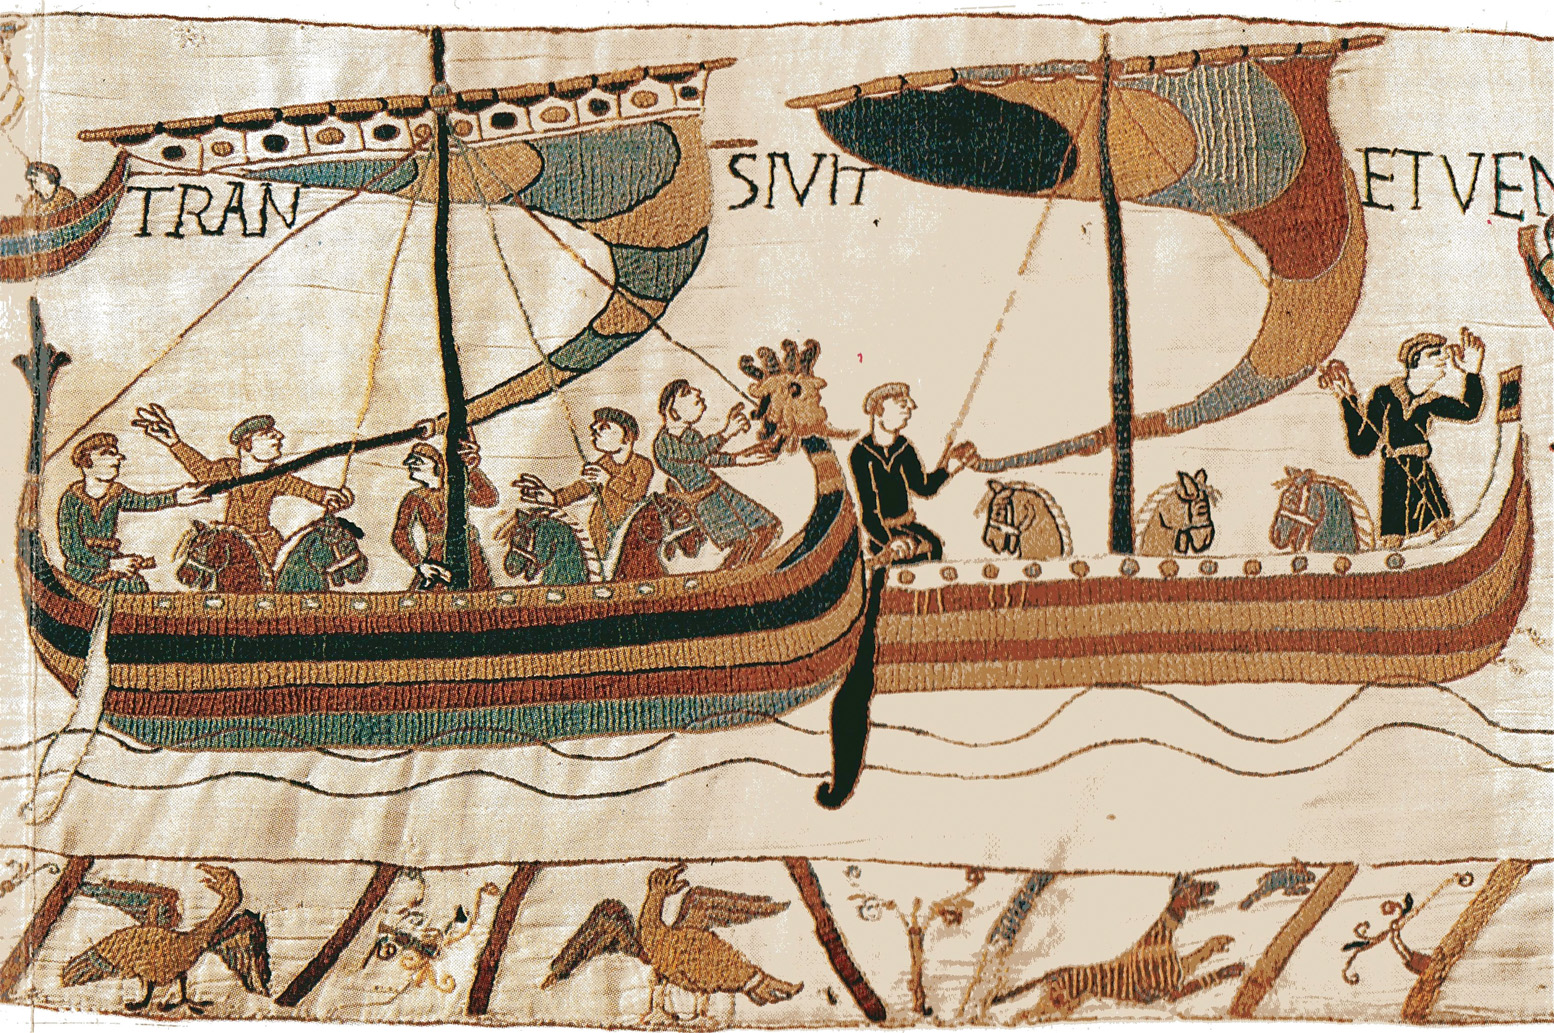 ABOVE:  The 11th Bayeux Tapestry depicts Duke William of Normandy's army crossing the English Channel in longships. 